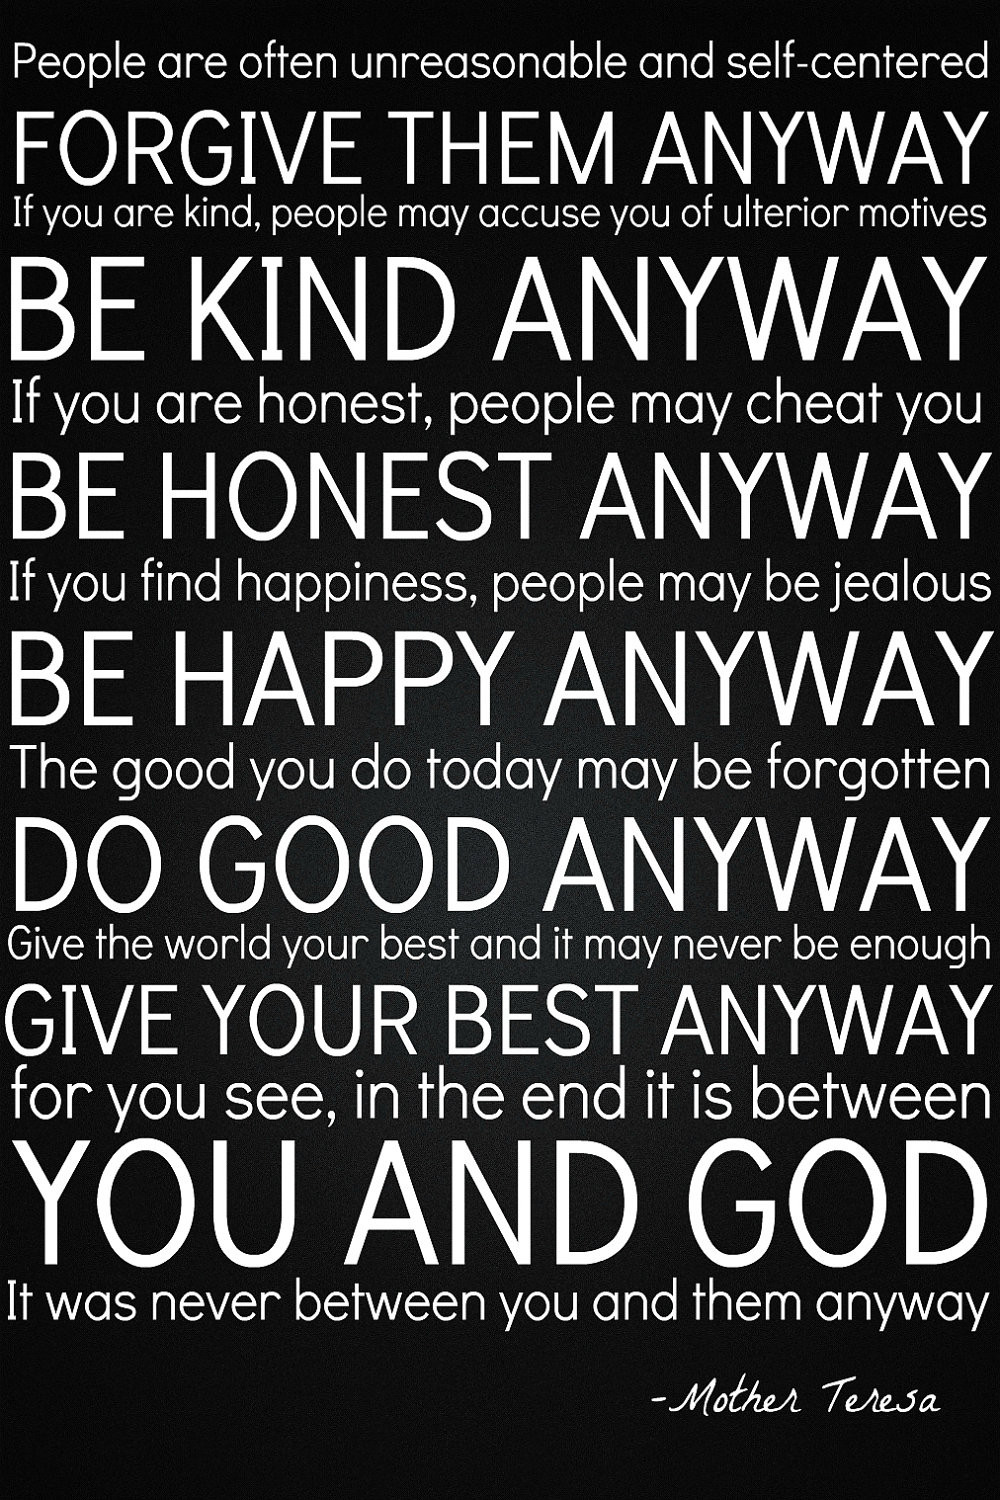 Quote Mother Teresa
 Do It Anyway By Mother Teresa